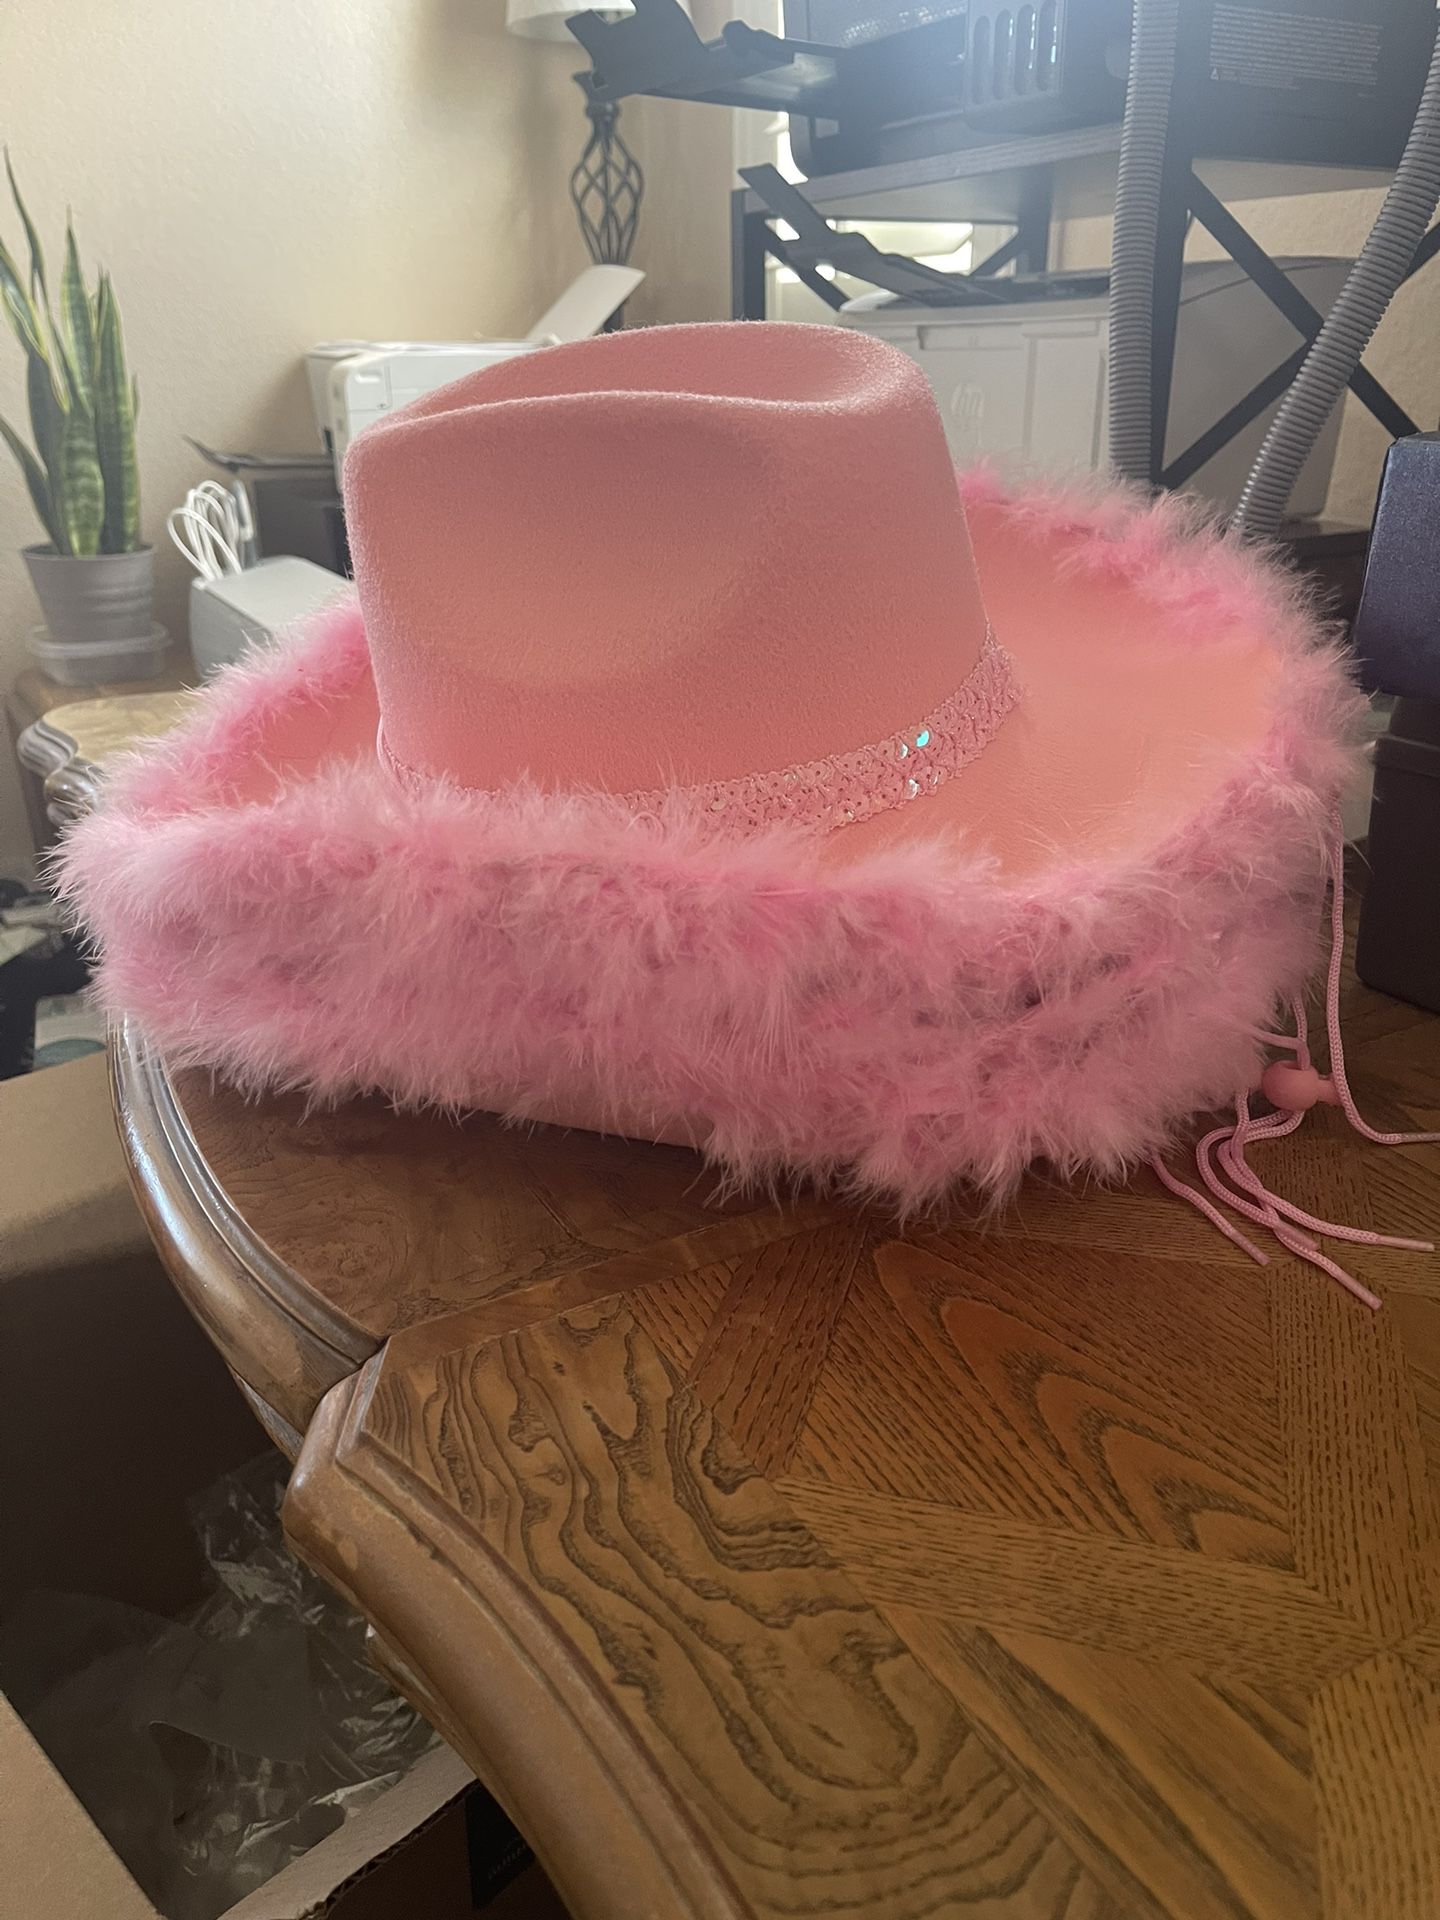 5 Pink Cowgirl Hats!